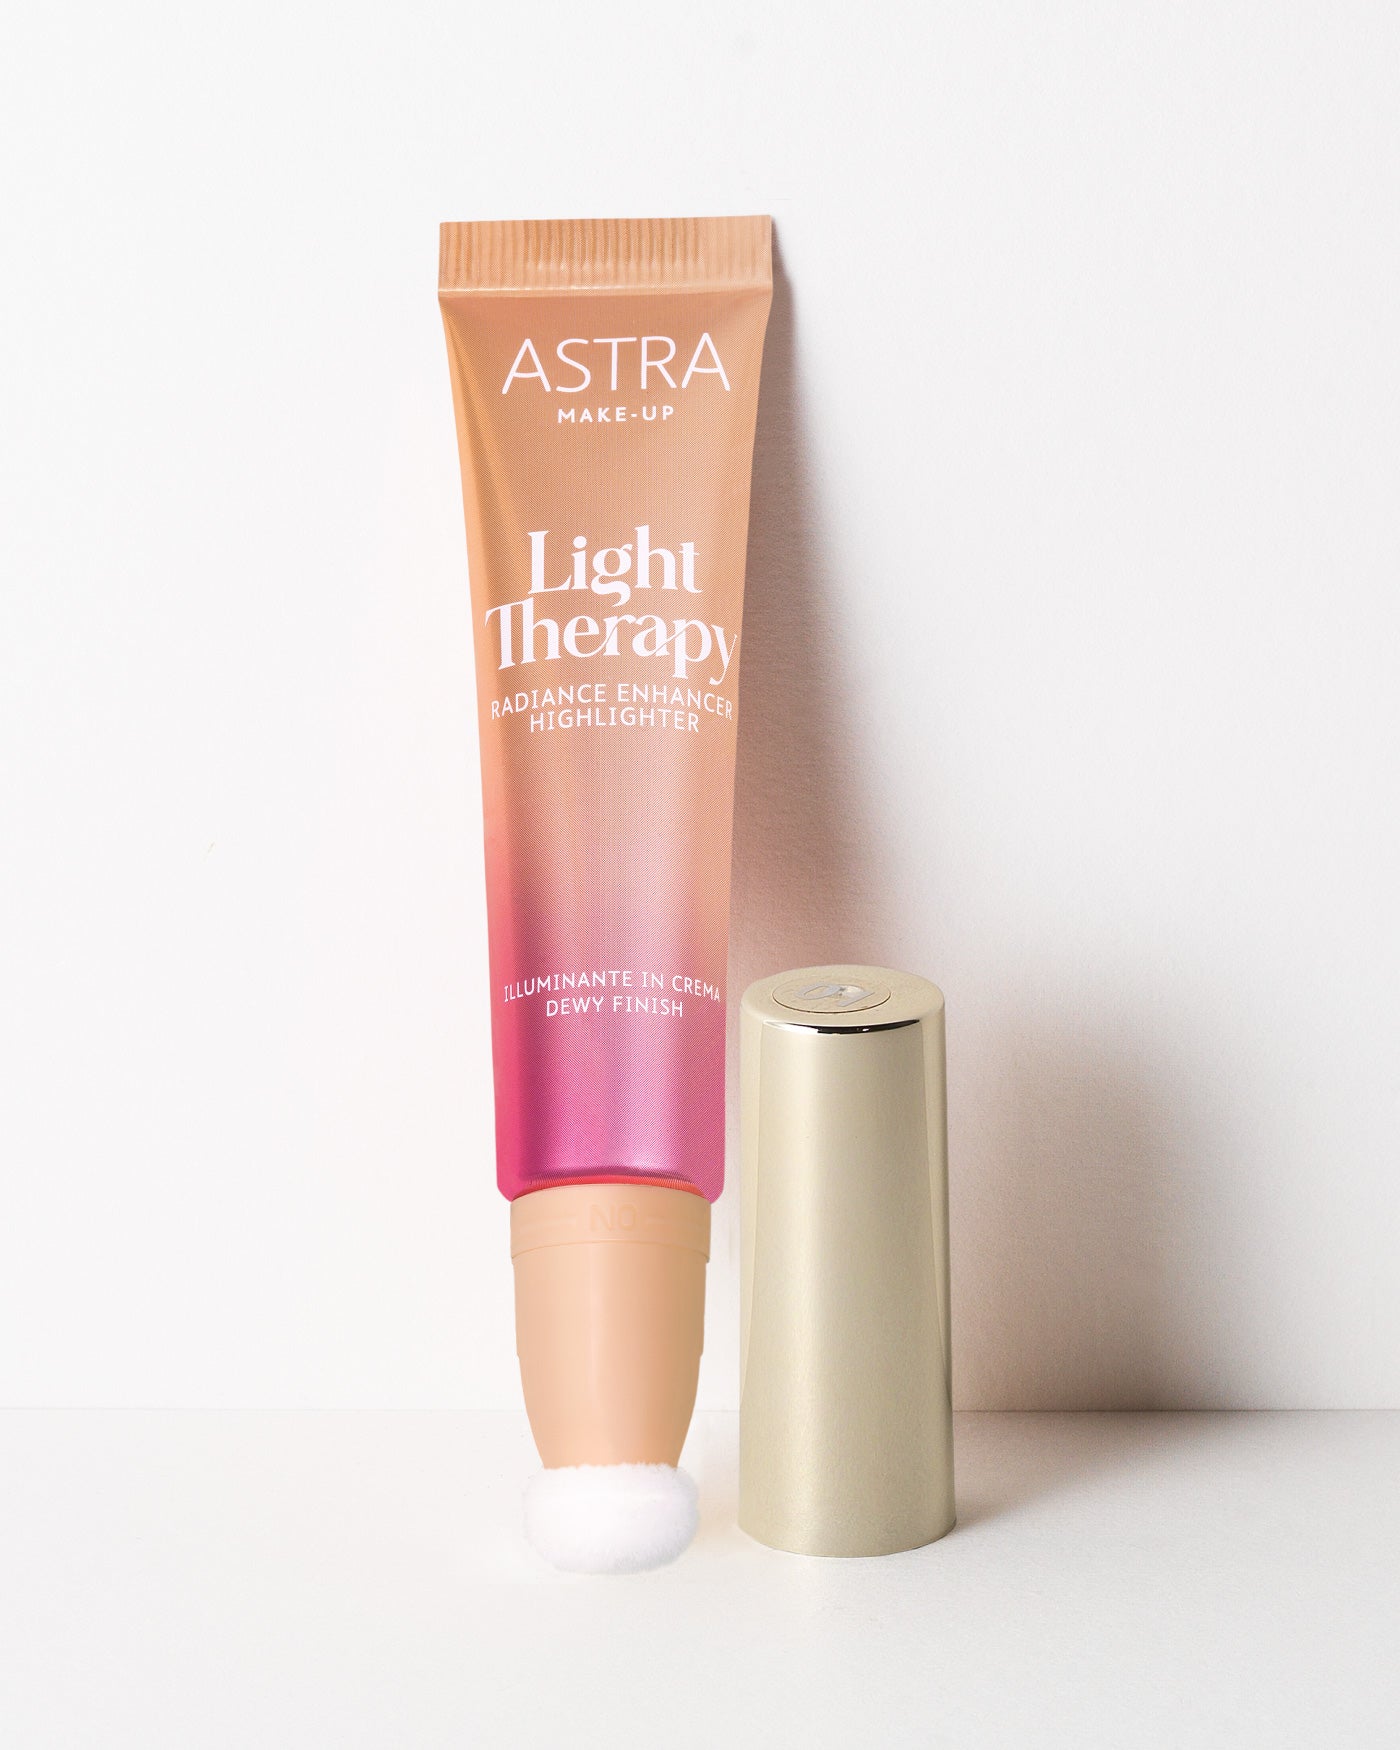 LIGHT THERAPY - Blush - Astra Make-Up